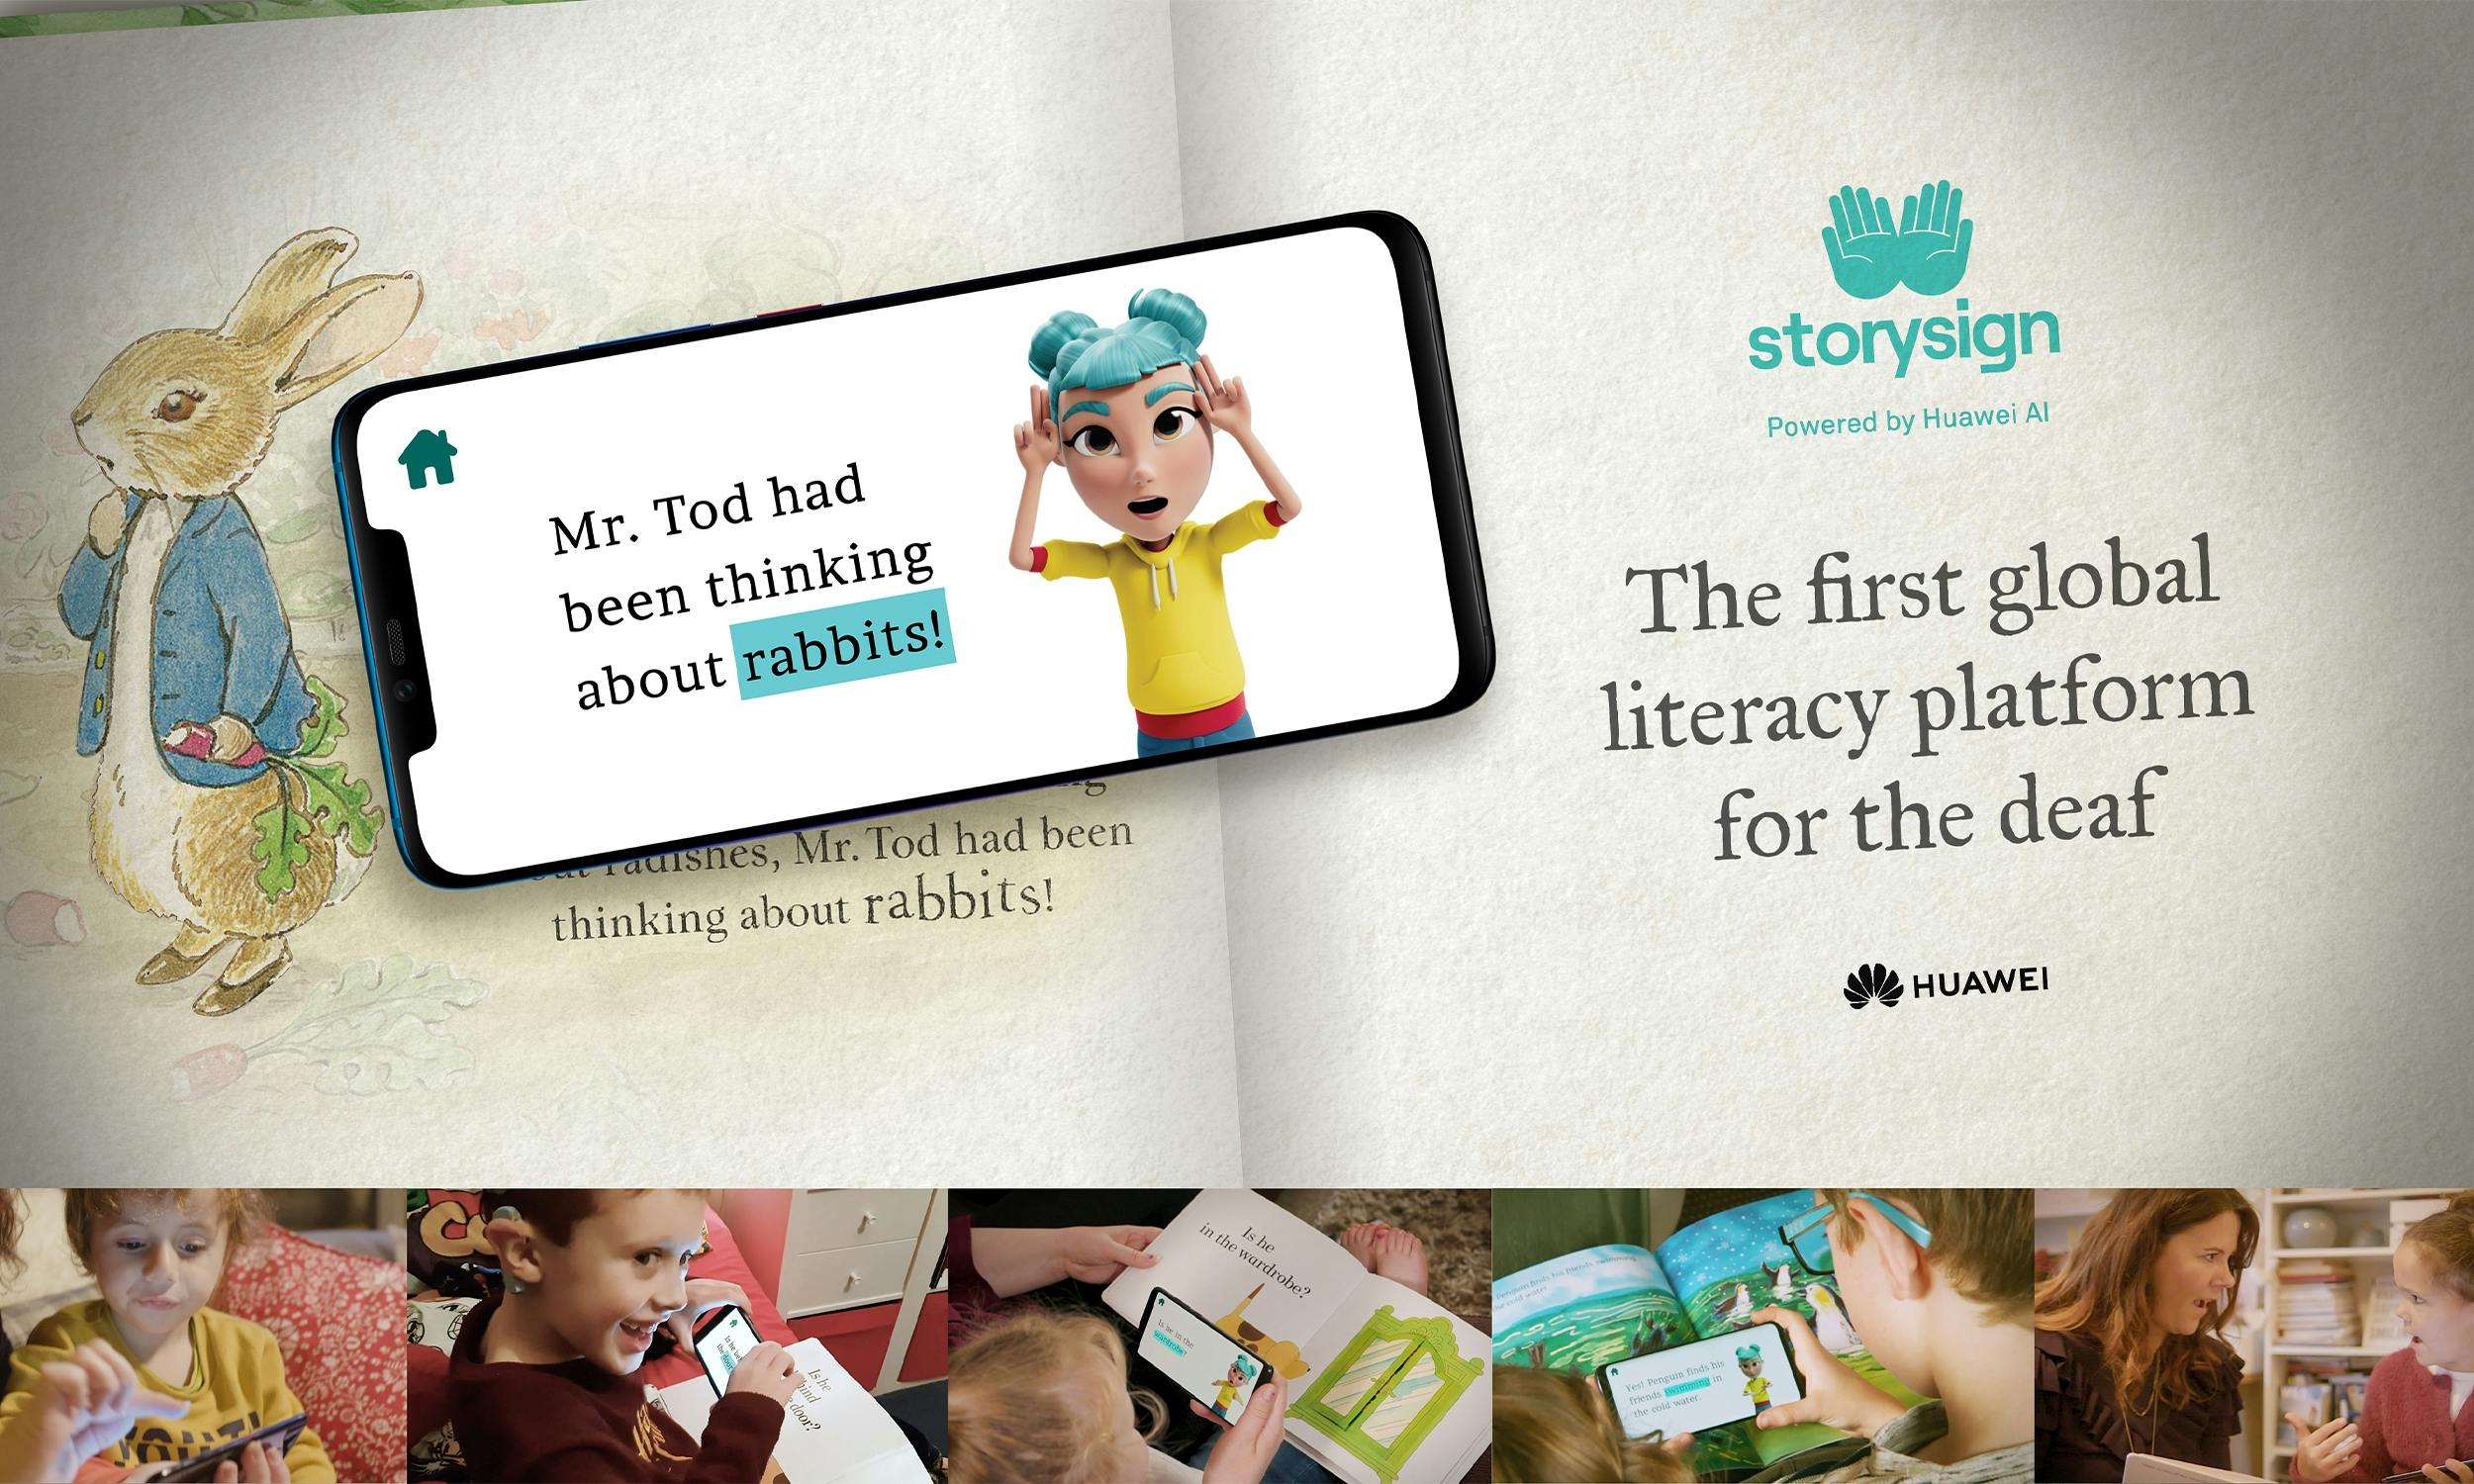 An moodboard for StorySign, a global literacy platform for the deaf, featuring the smartphone app and images of children engaging with books.